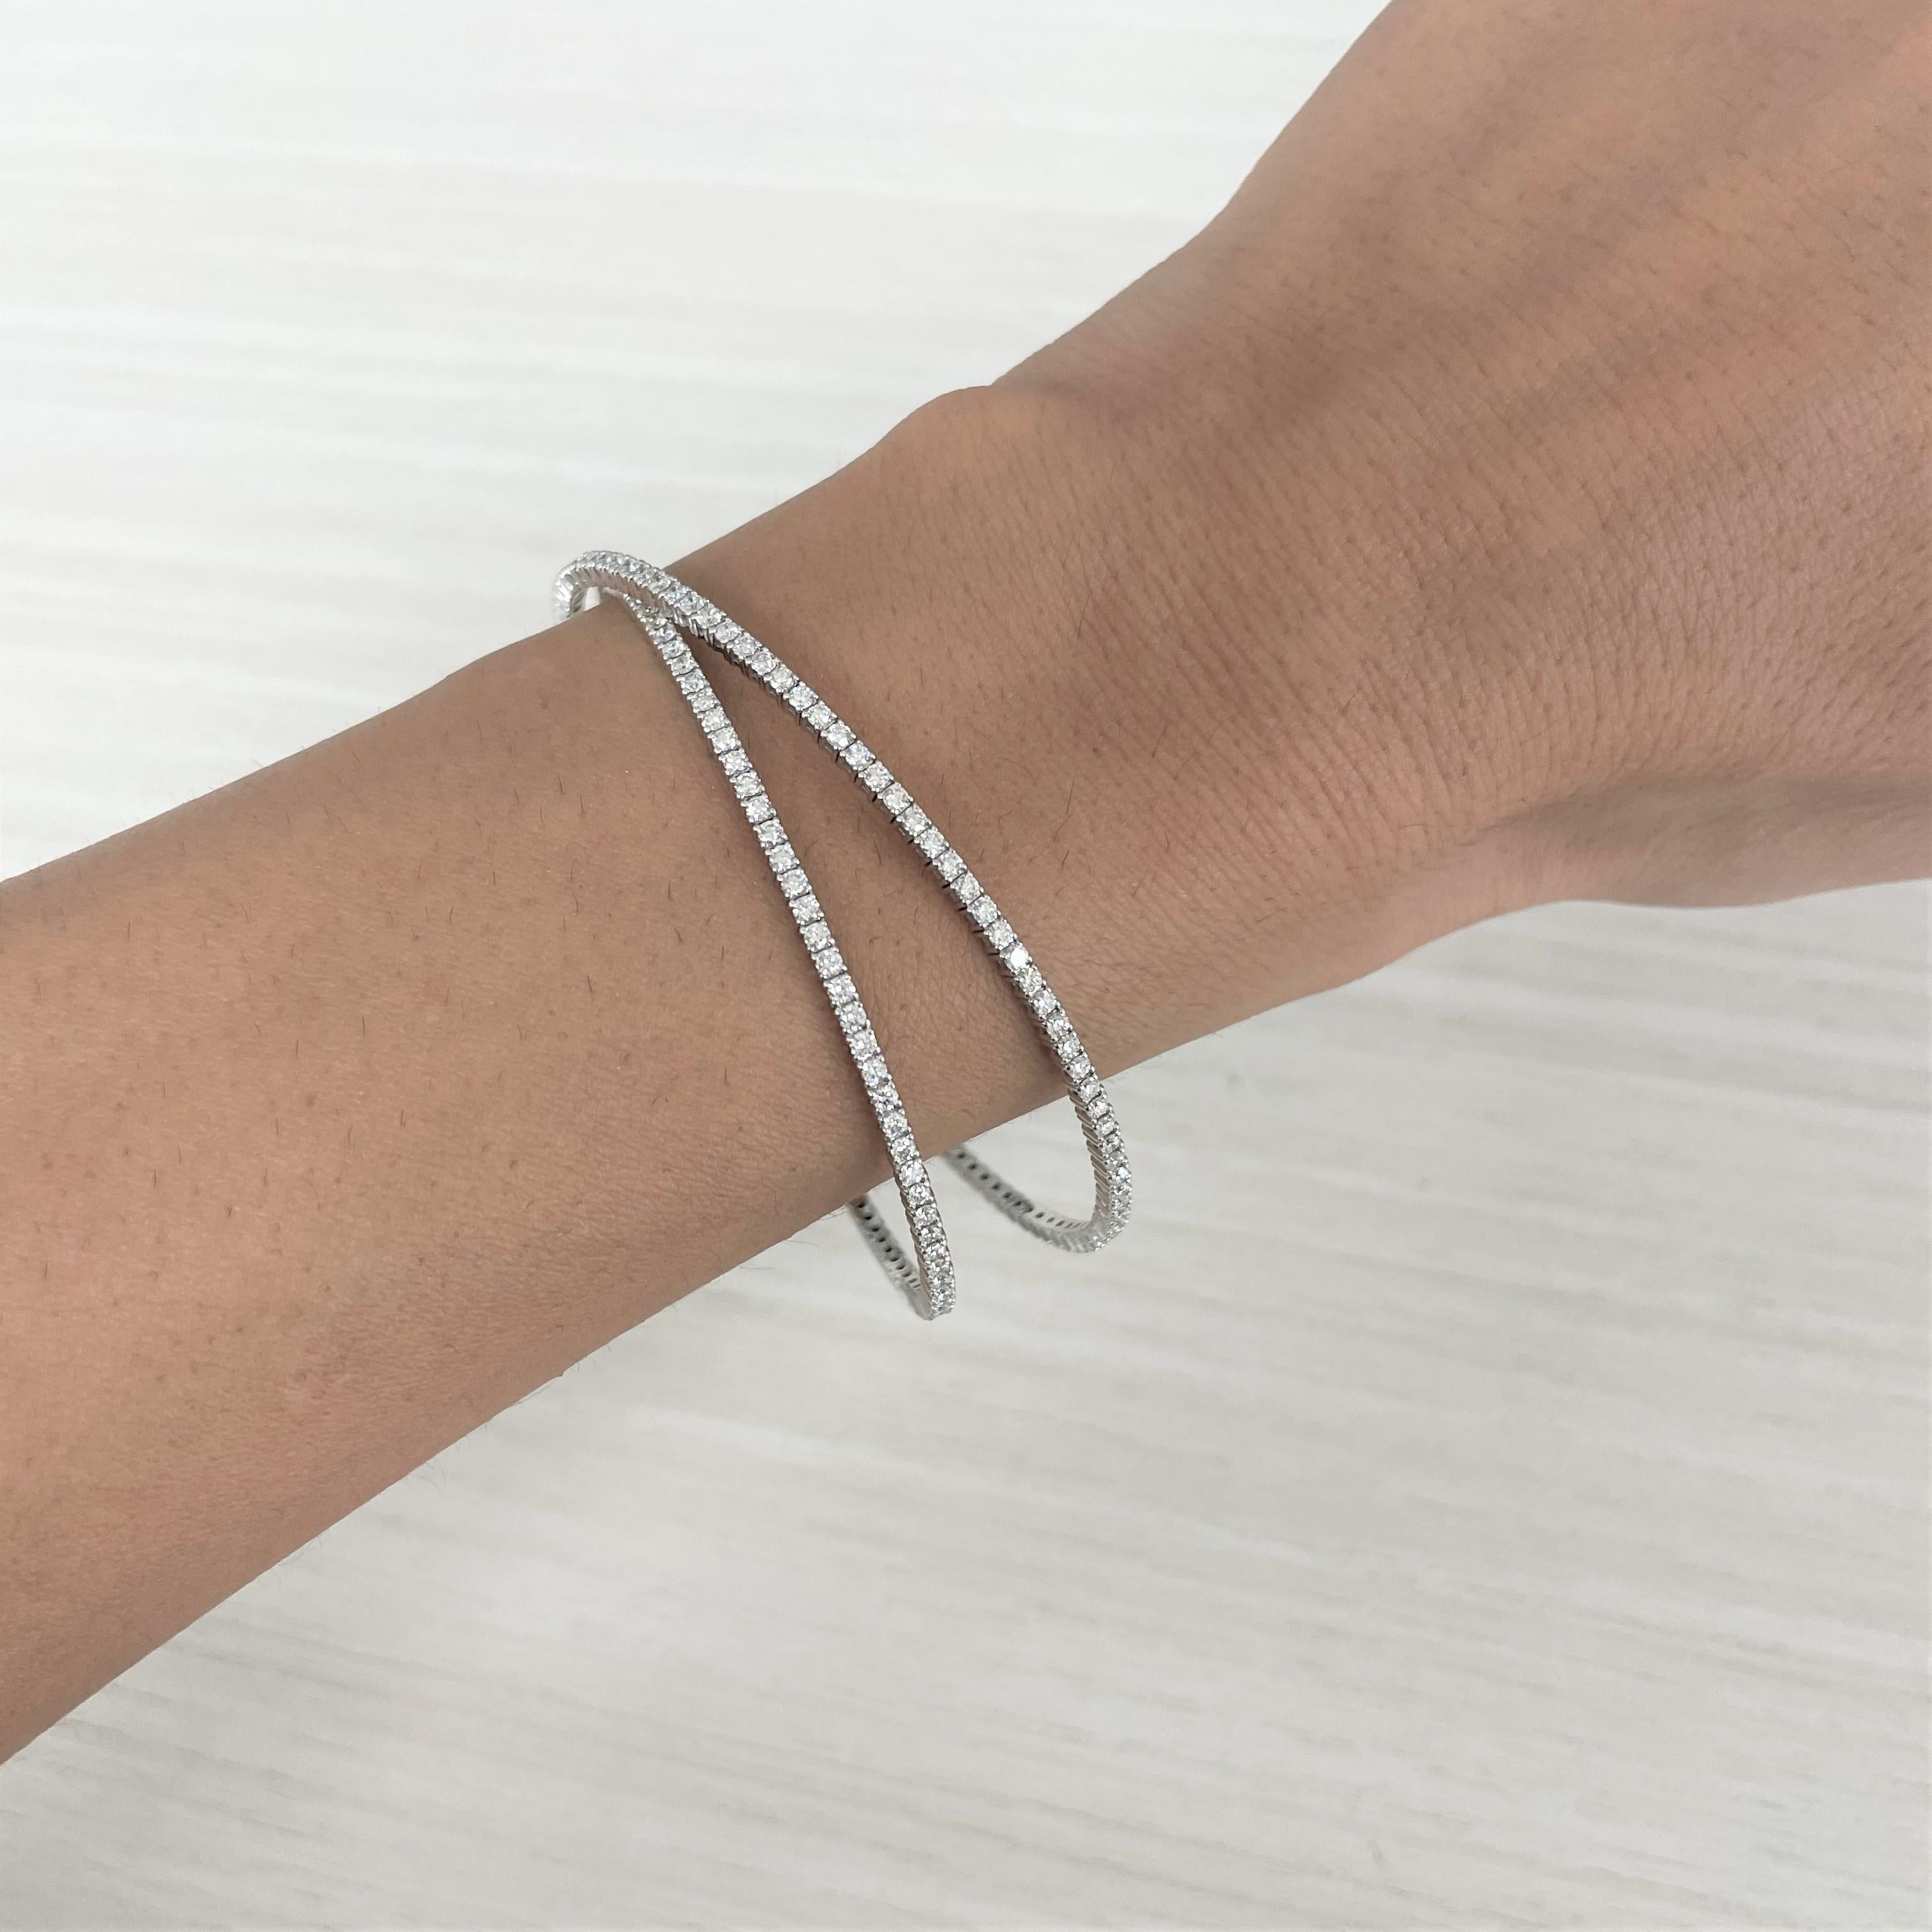 Quality Flexible Bangle: Made from real 14k gold and 180 glittering white approximately 3.40 ct. Certified diamonds, featuring a single row of white diamonds flexible diameter for comfort with a color and clarity of GH-SI

Surprise Your Loved One